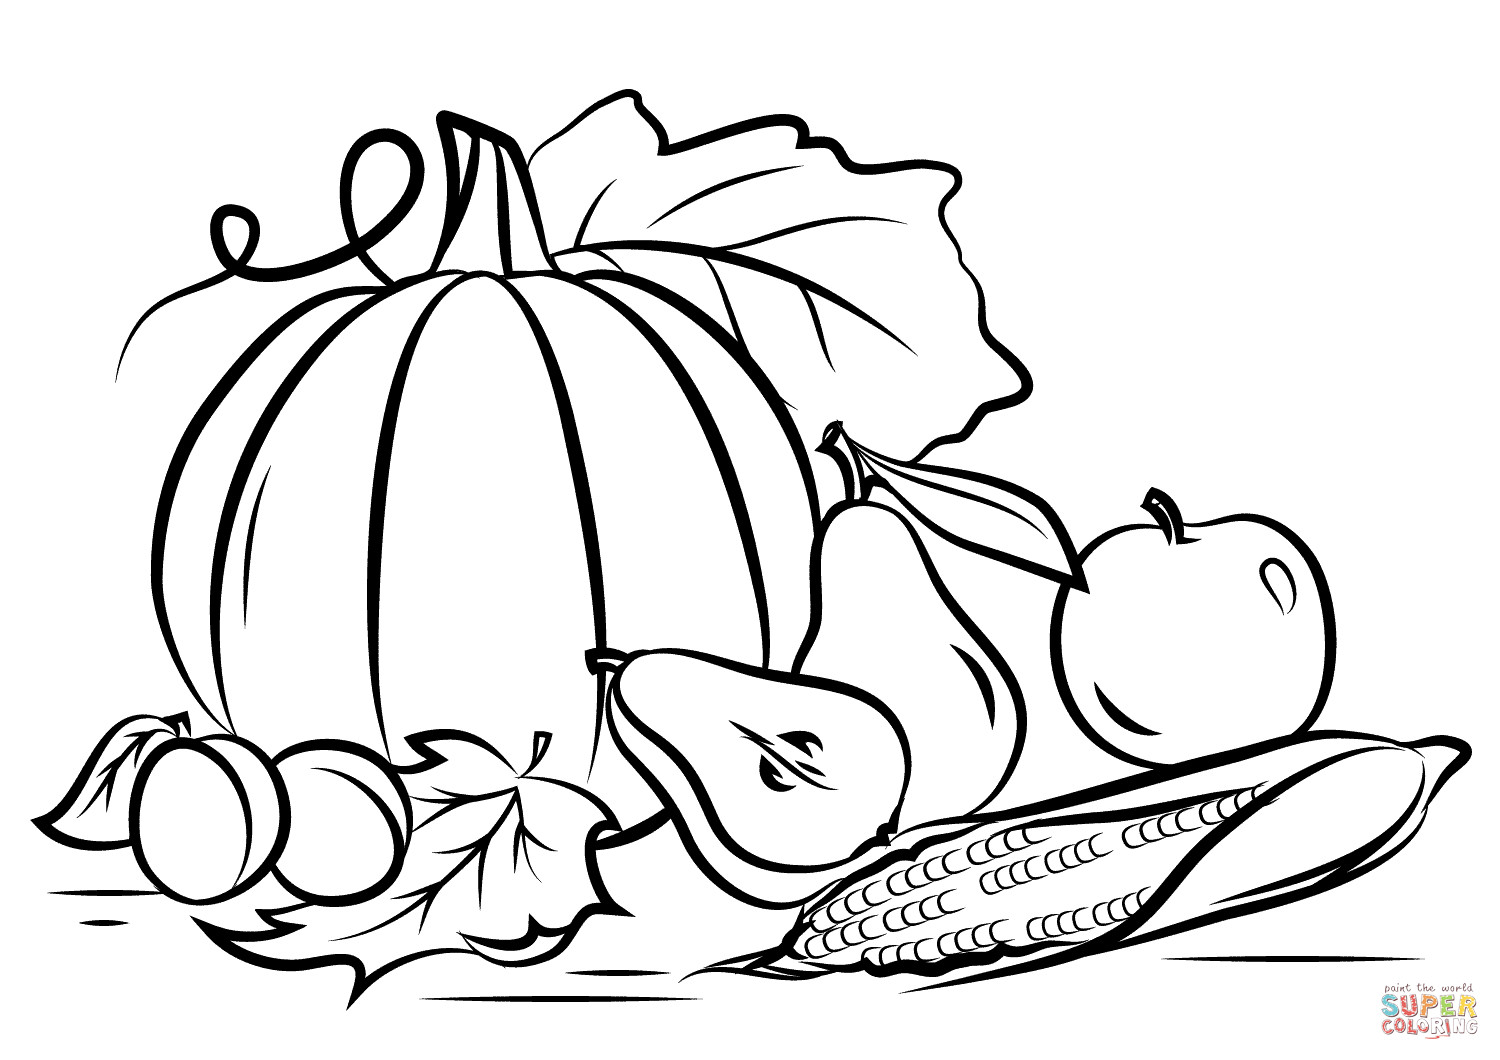 Free Printable Fall Coloring Sheets
 Autumn Harvest coloring page